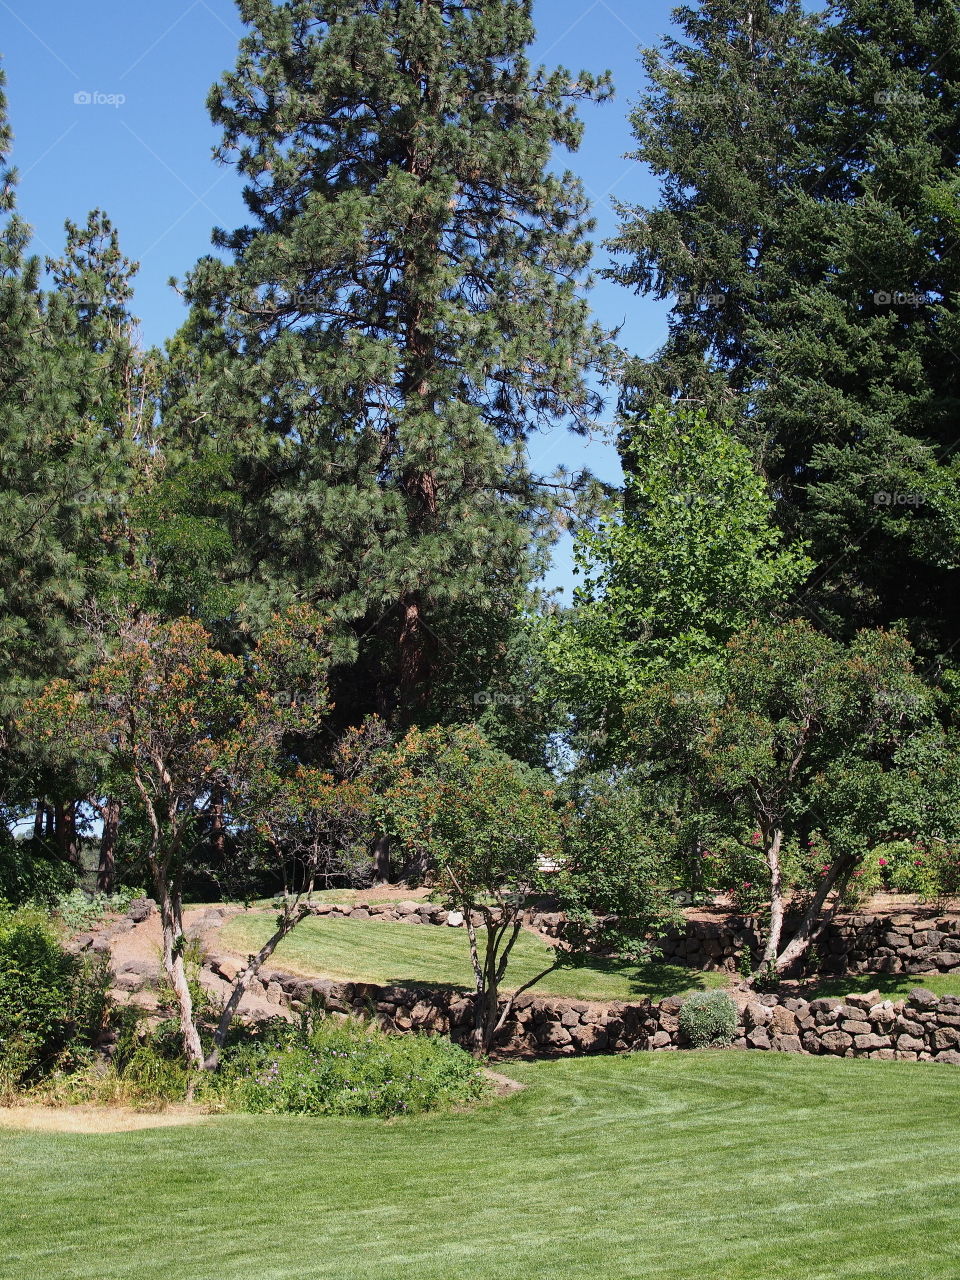 A dirt path leads up a hill with different levels cut out and landscaped with deciduous trees, ponderosa pine trees, grass, plants, flowers, and rock walls. 